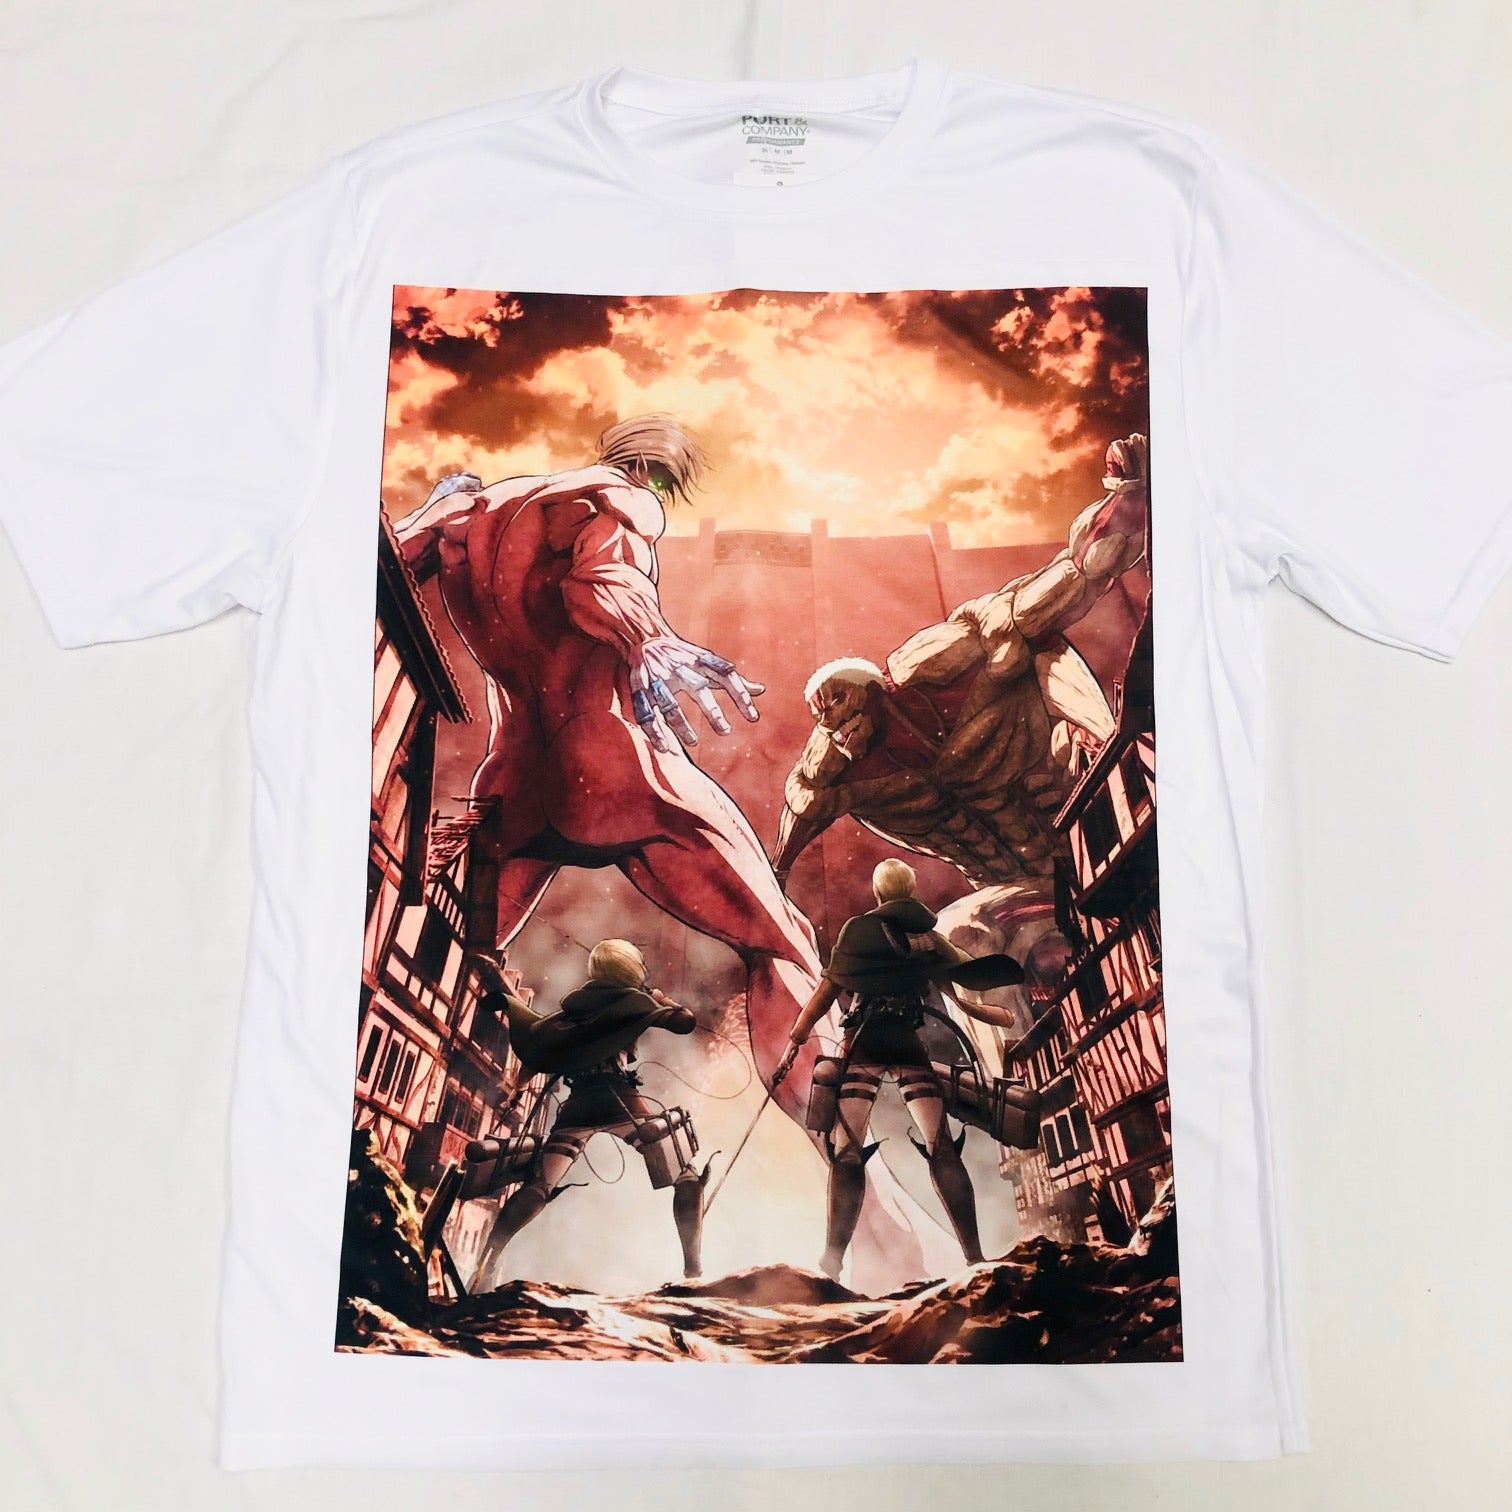 Anime Attack On Titan T-Shirt - Super Anime Store FREE SHIPPING FAST SHIPPING USA